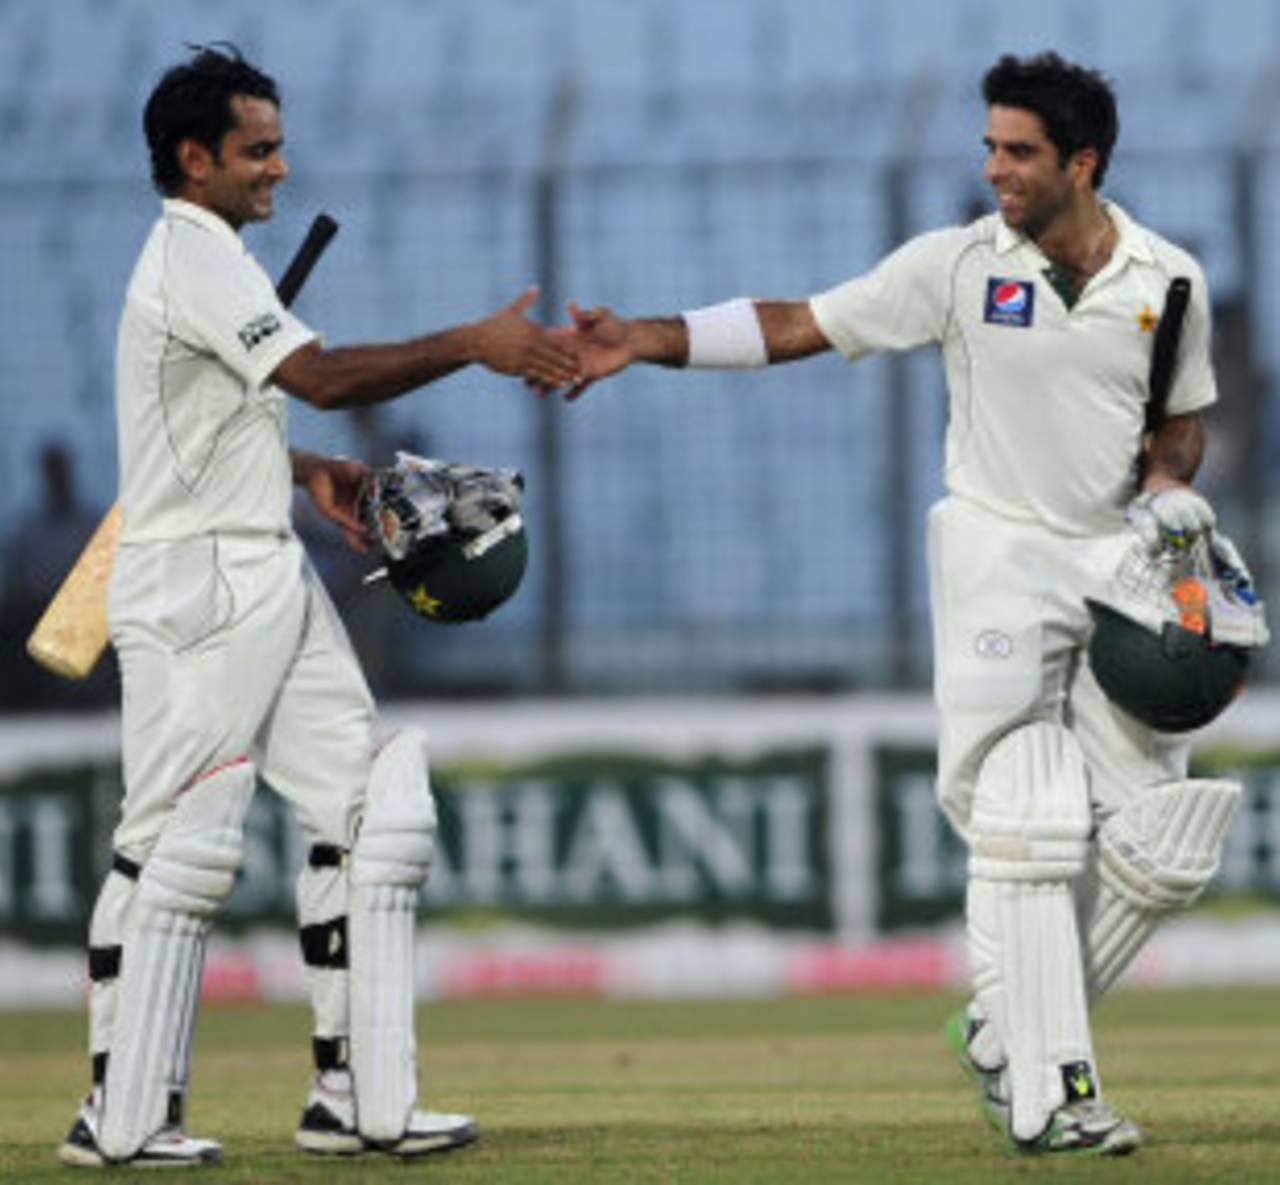 Mohammad Hafeez and Taufeeq Umar opened the batting for the 11th consecutive Test, a Pakistan record, Bangladesh v Pakistan, 1st Test, Chittagong, 1st day, December 9, 2011 